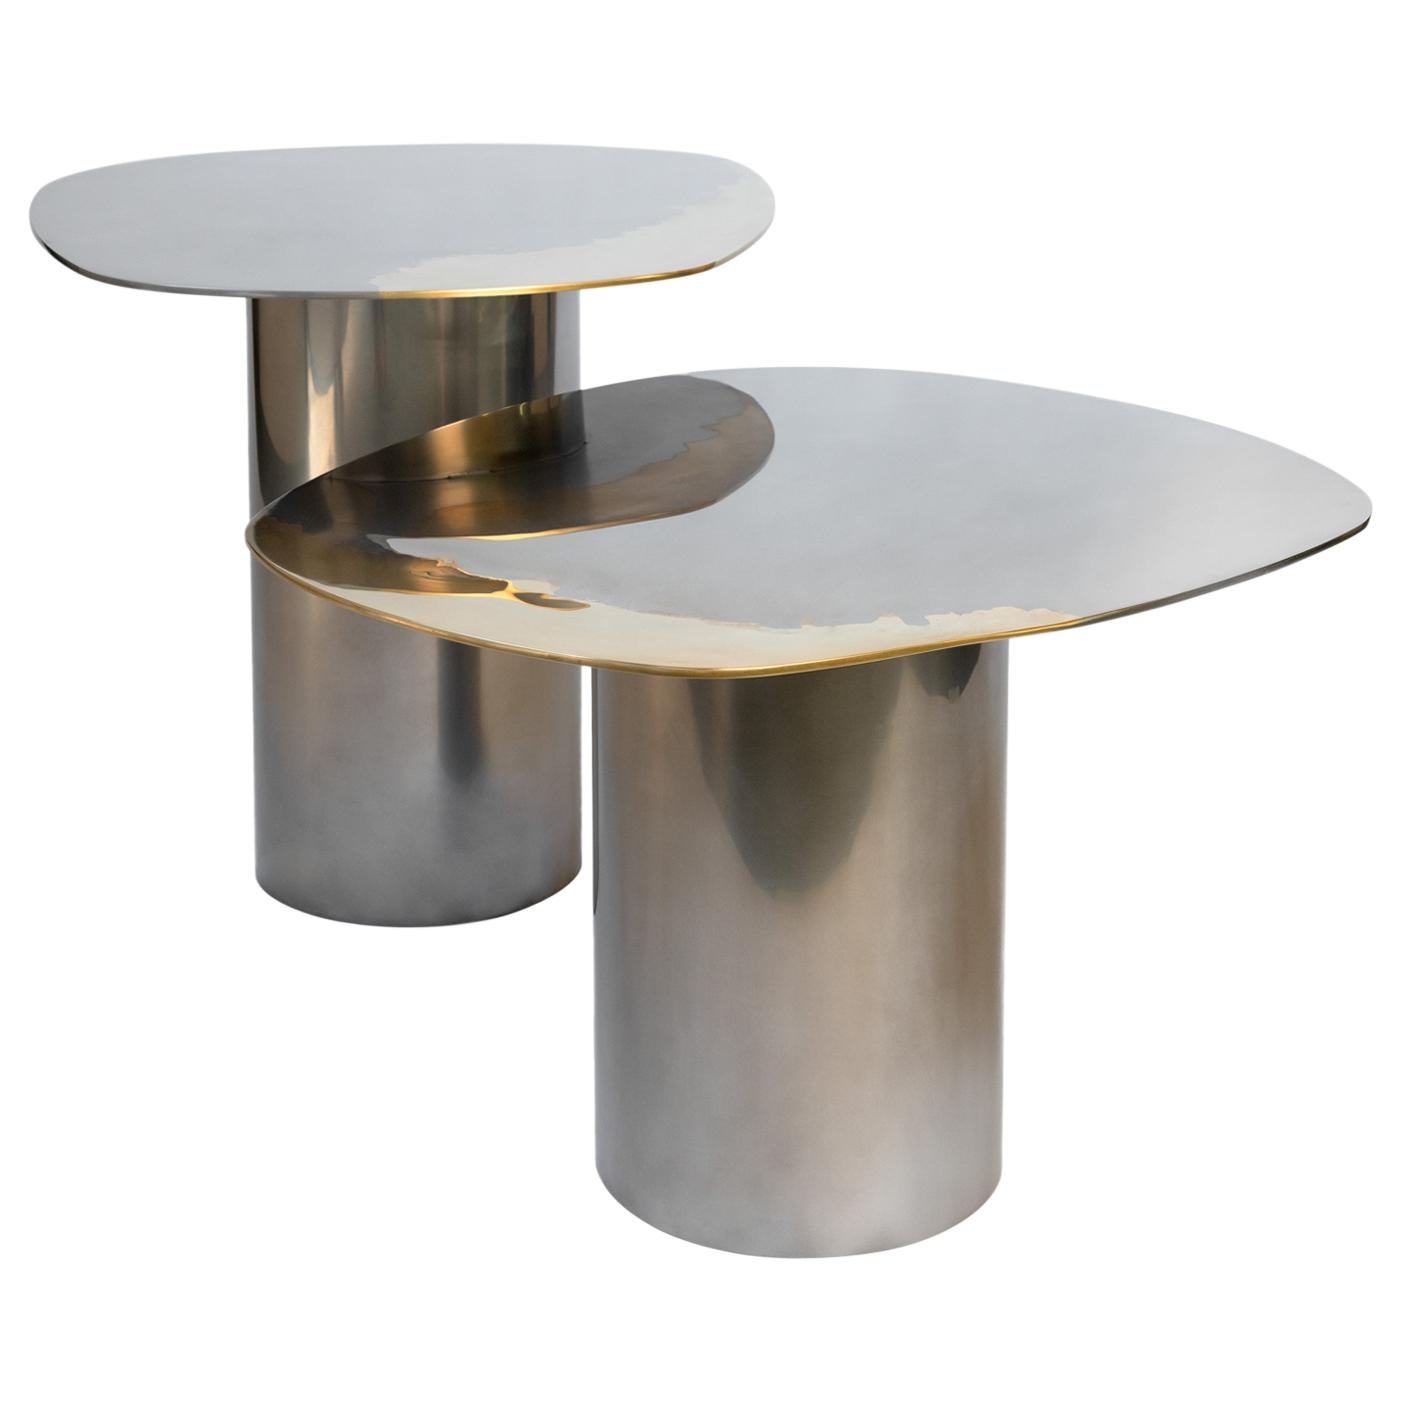 Polished Bimetal Two-Tone Brass and Stainless Steel Handcrafted Nesting Tables